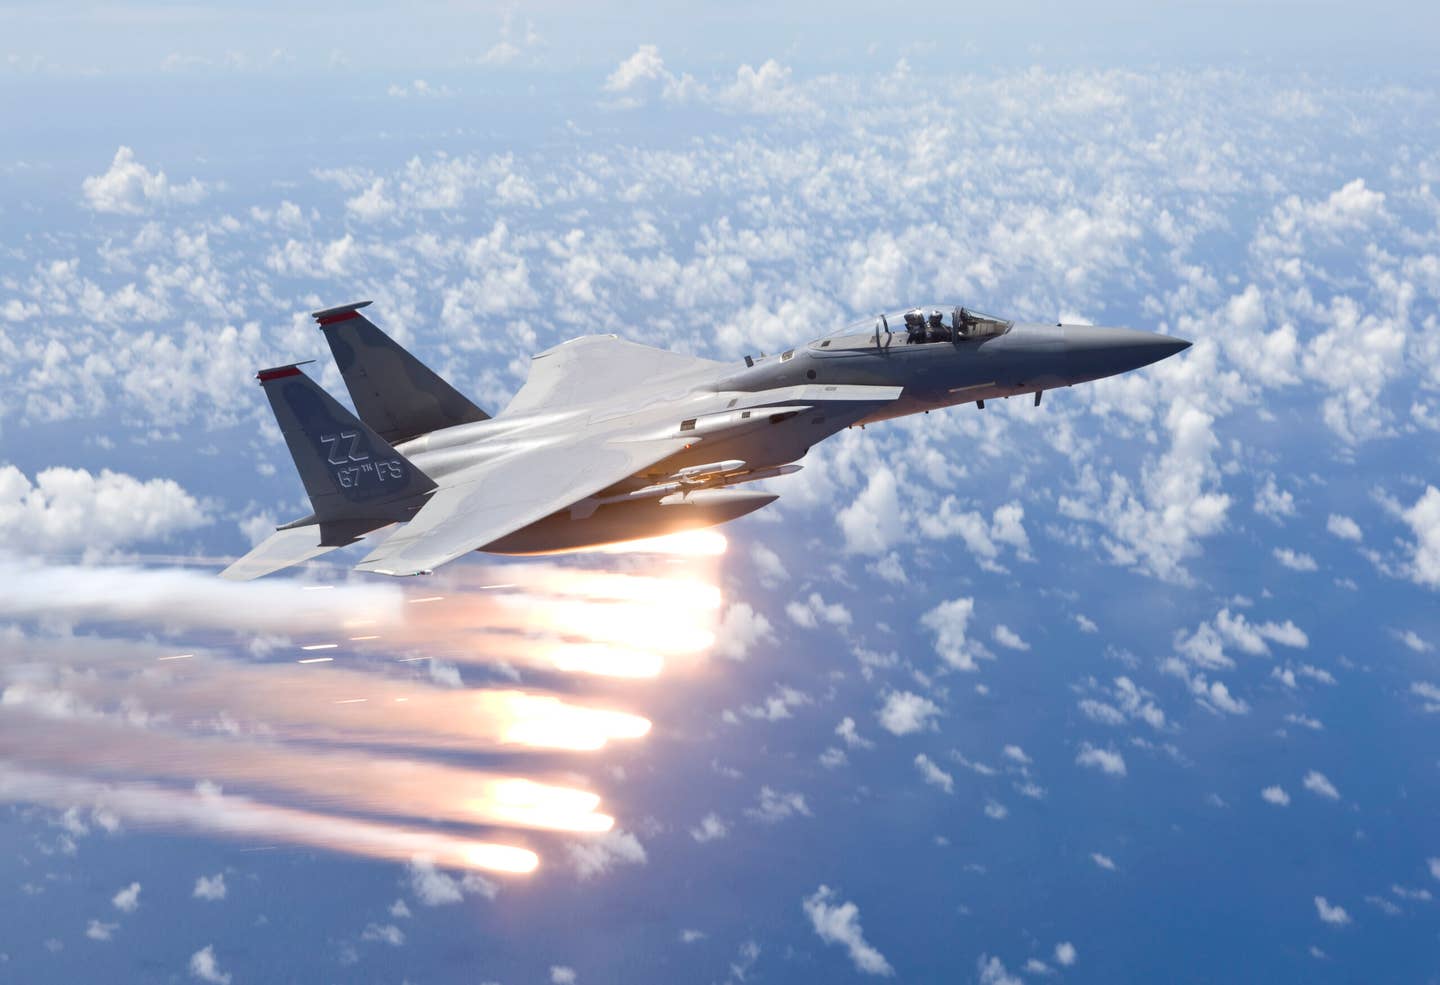 An F-15C from the 67th Fighter Squadron at Kadena Air Base, Okinawa, Japan, releases flares over the Pacific Ocean during a training mission. <em>Getty Images</em>